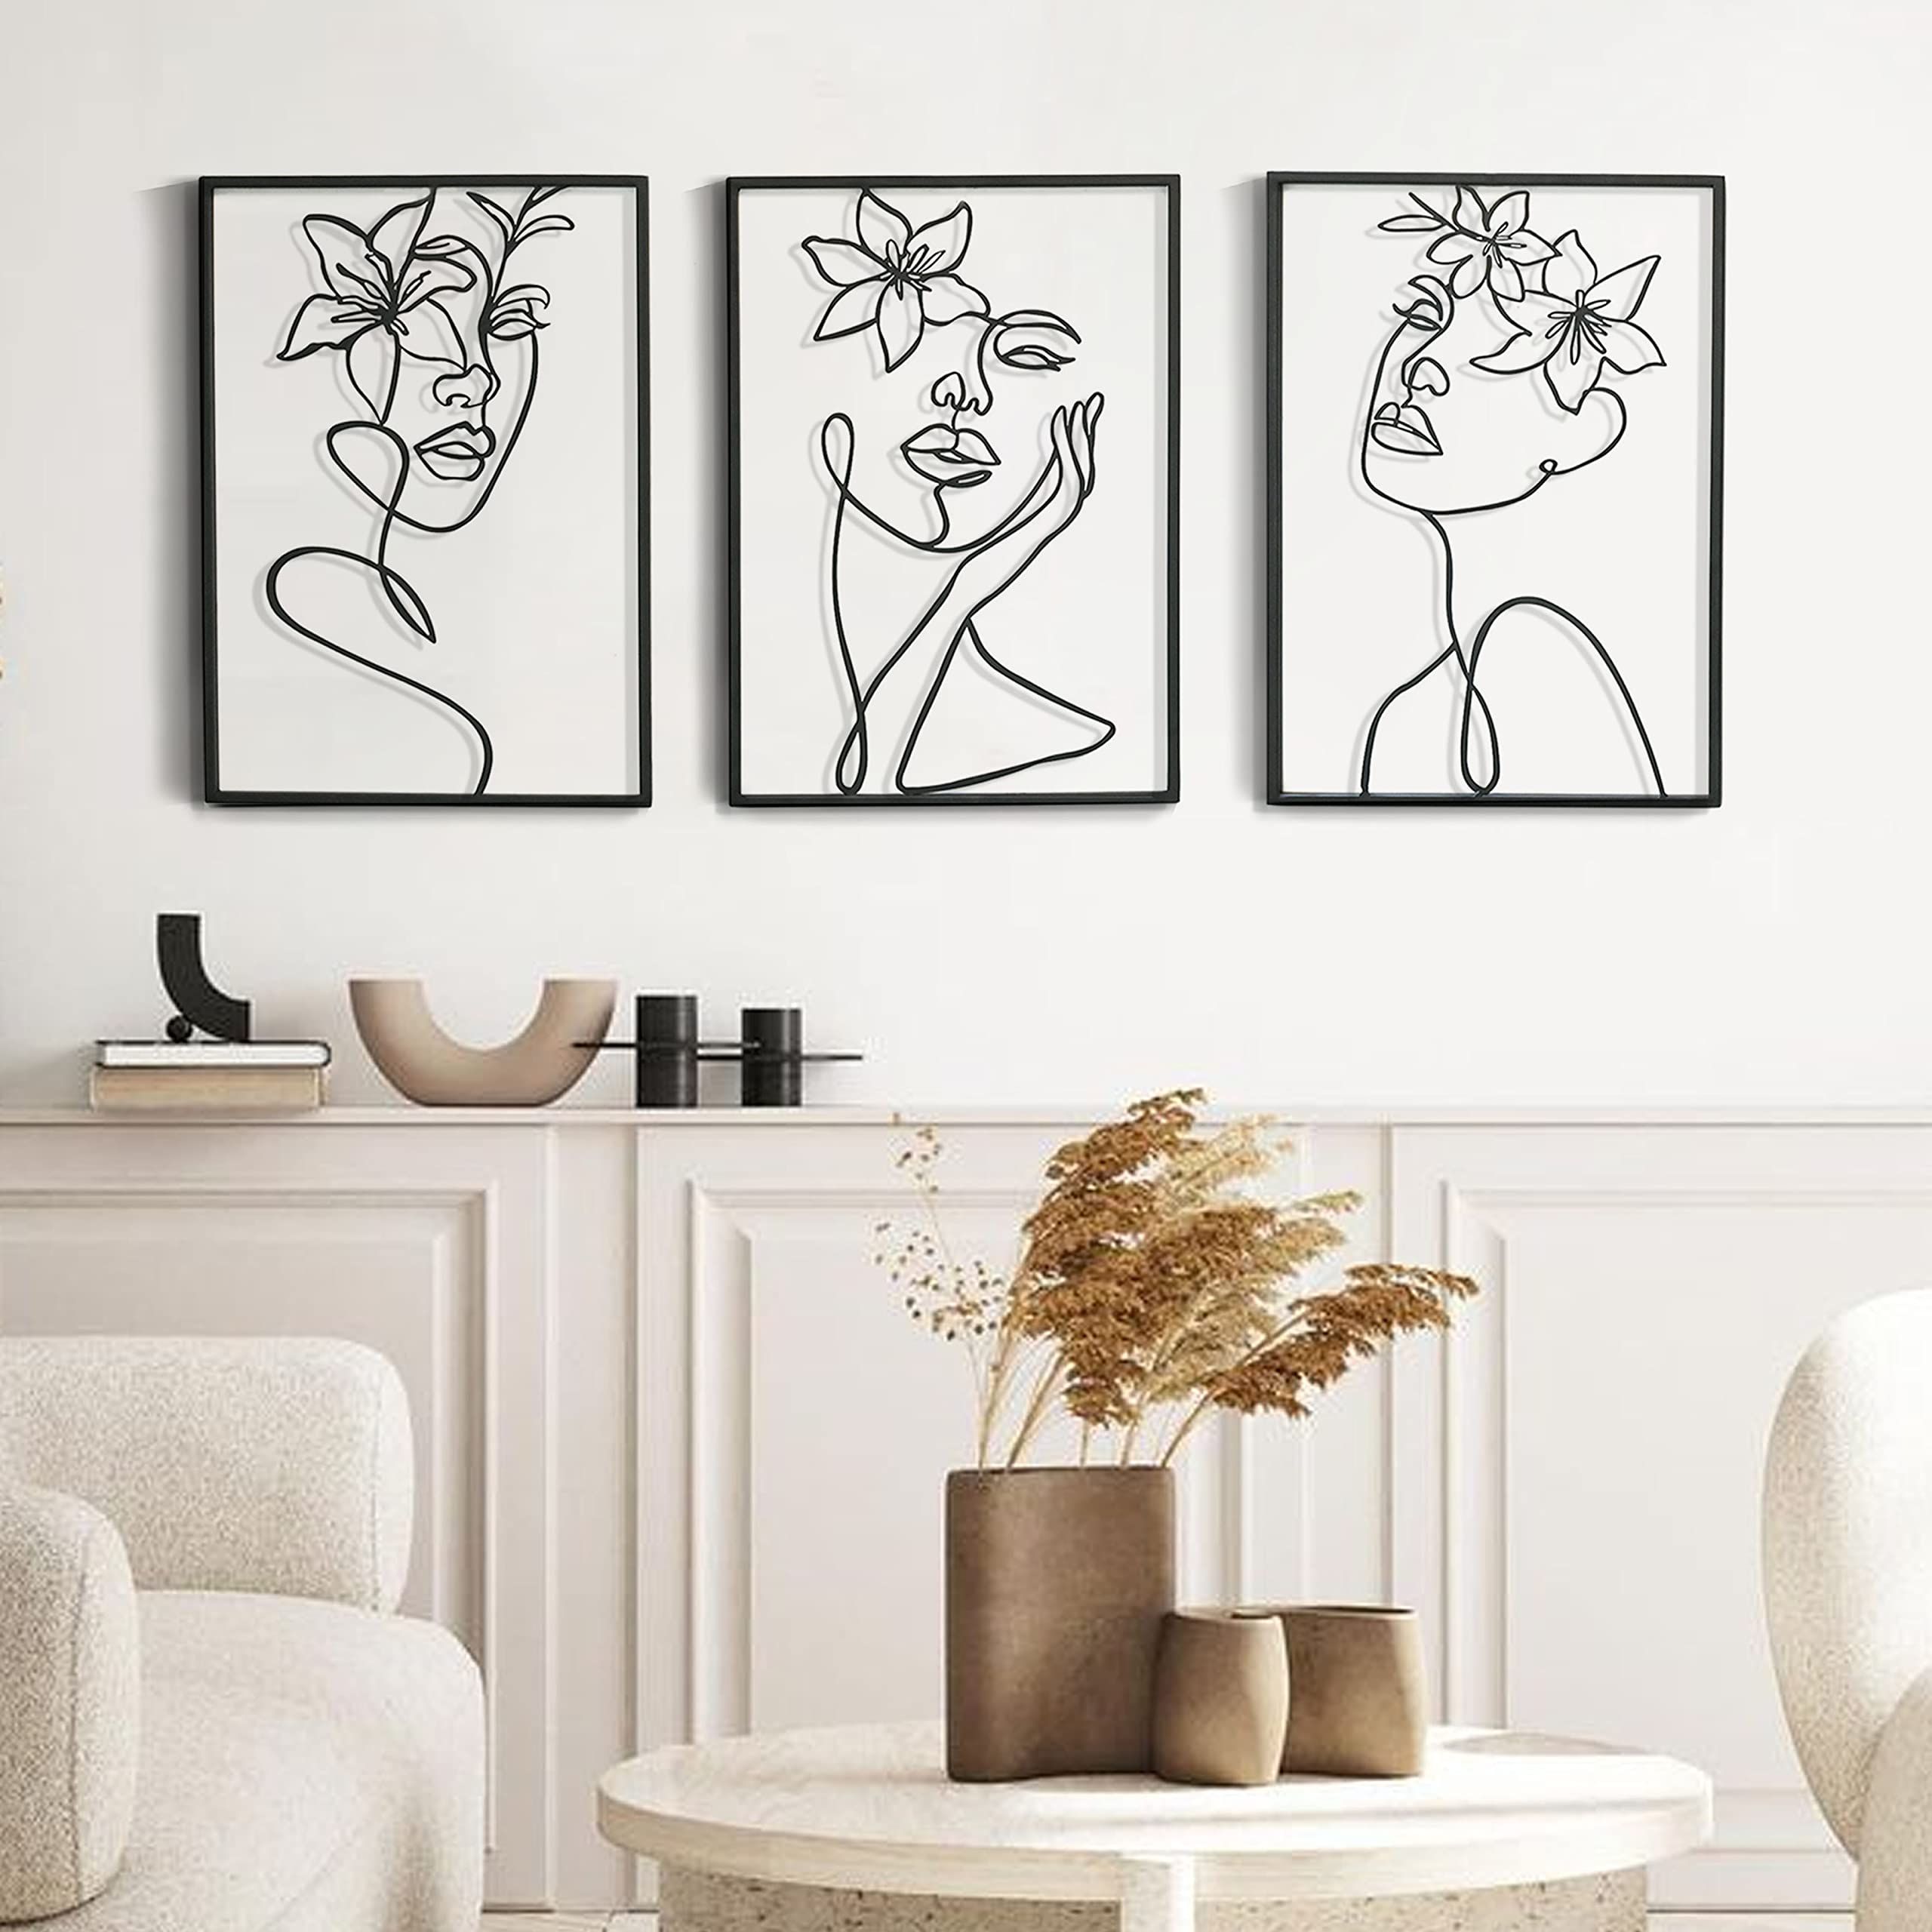 Best And Newest Amazon: Remenna Minimalist Decor Aesthetic Wall Art Decor Modern  Abstract One Line Women Body Face Art Large Metal Wall Decor For Living  Room Bedroom Bathroom Set Of 3 (black) : Home & Inside Aesthetic Wall Art (Photo 2 of 15)